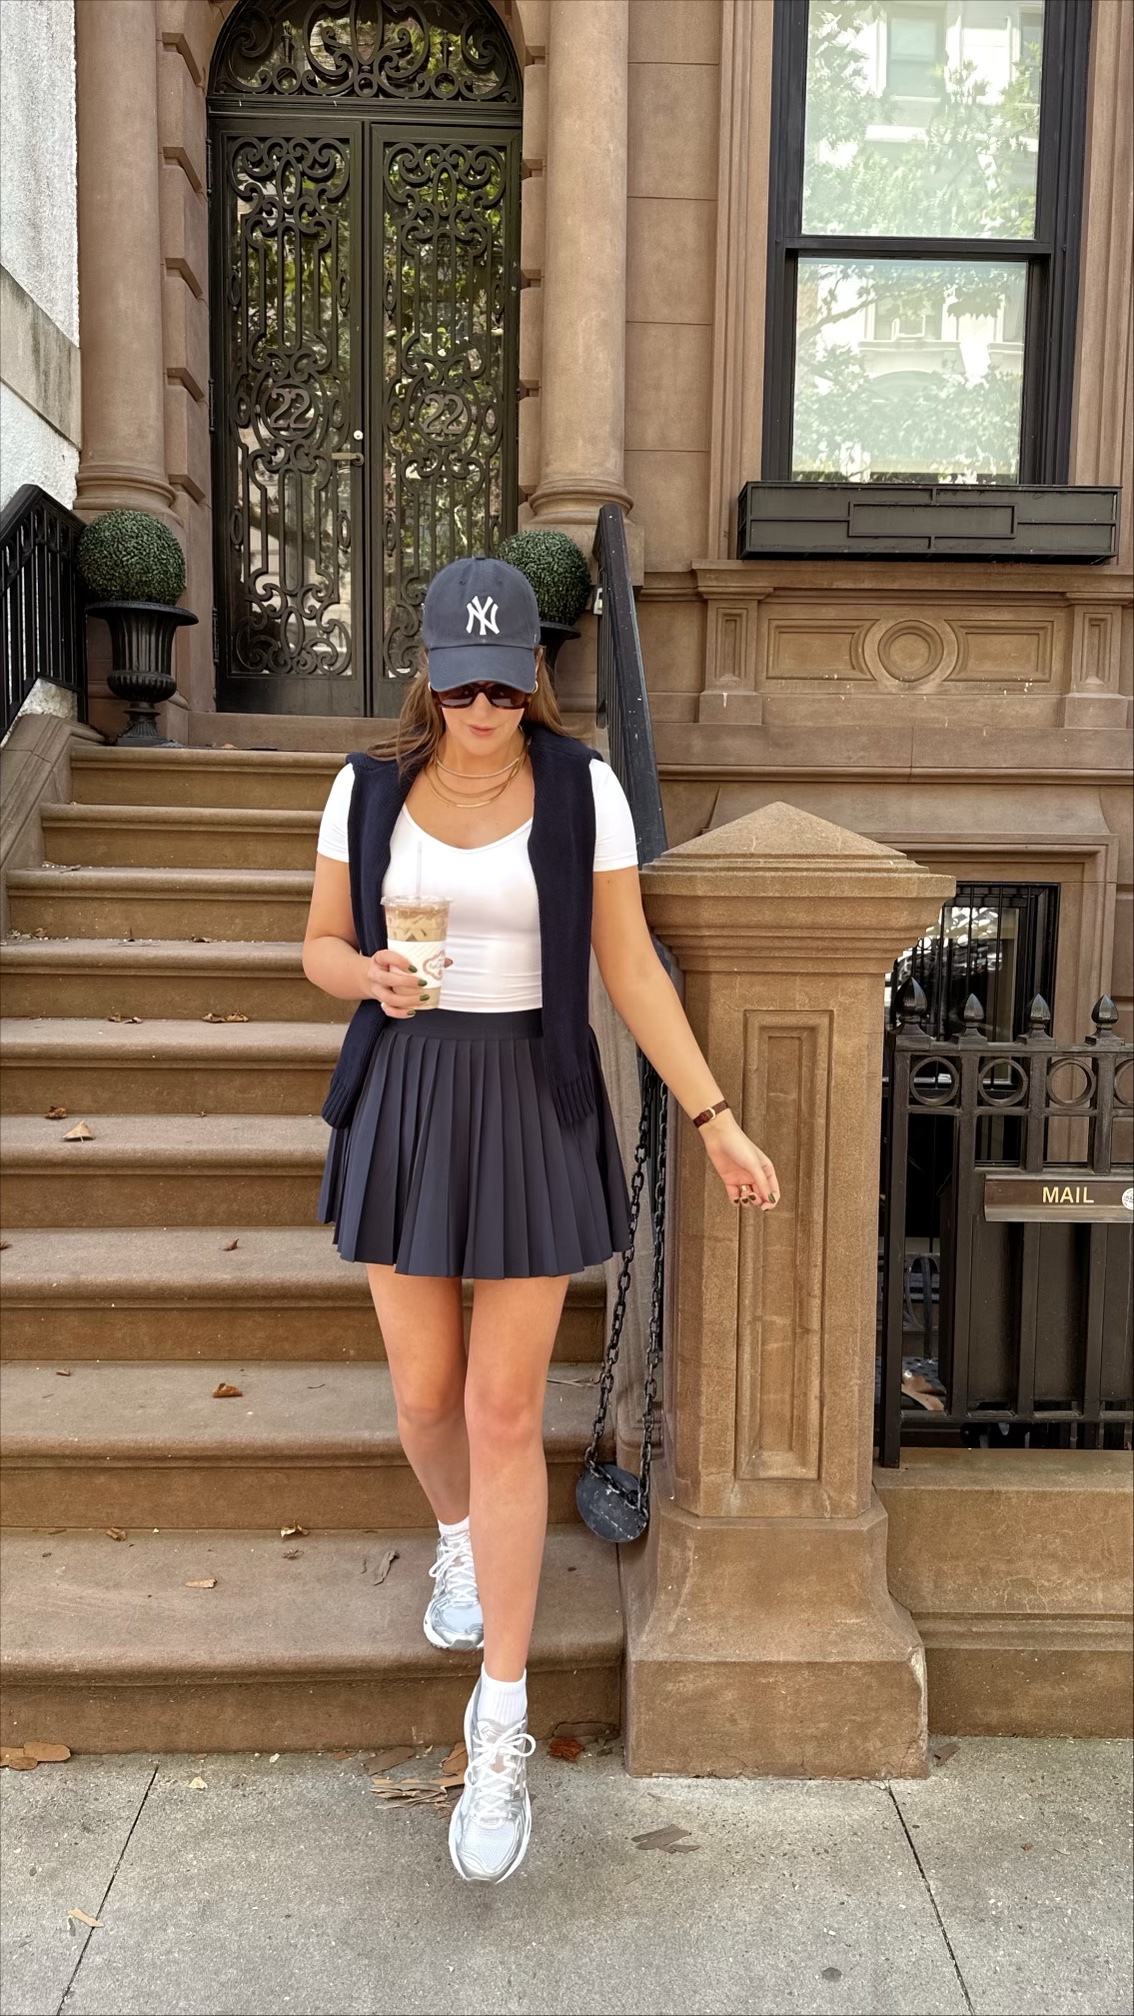 Anna wearing a sporty outfit and a hat on a New York City brownstone stoop.